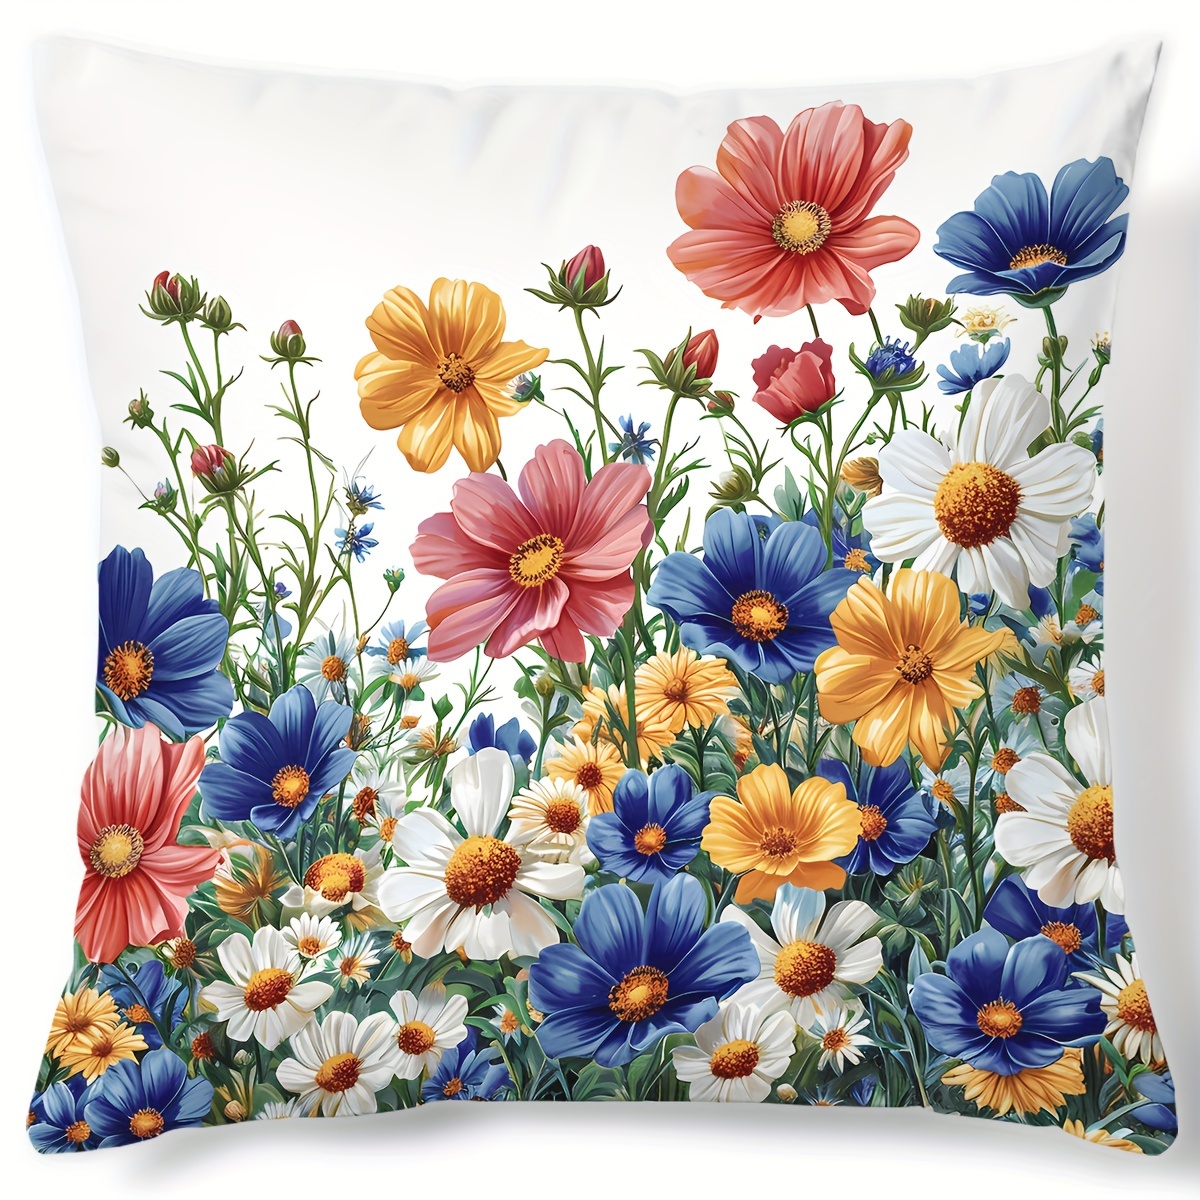 

1pc Modern Floral Digital Print Cushion Cover, Soft Comfortable Pillowcase For Bedroom & Sofa, Home Decor, Invisible Zip Closure, Durable Fabric – 18x18 Inches – Pillow Insert Not Included